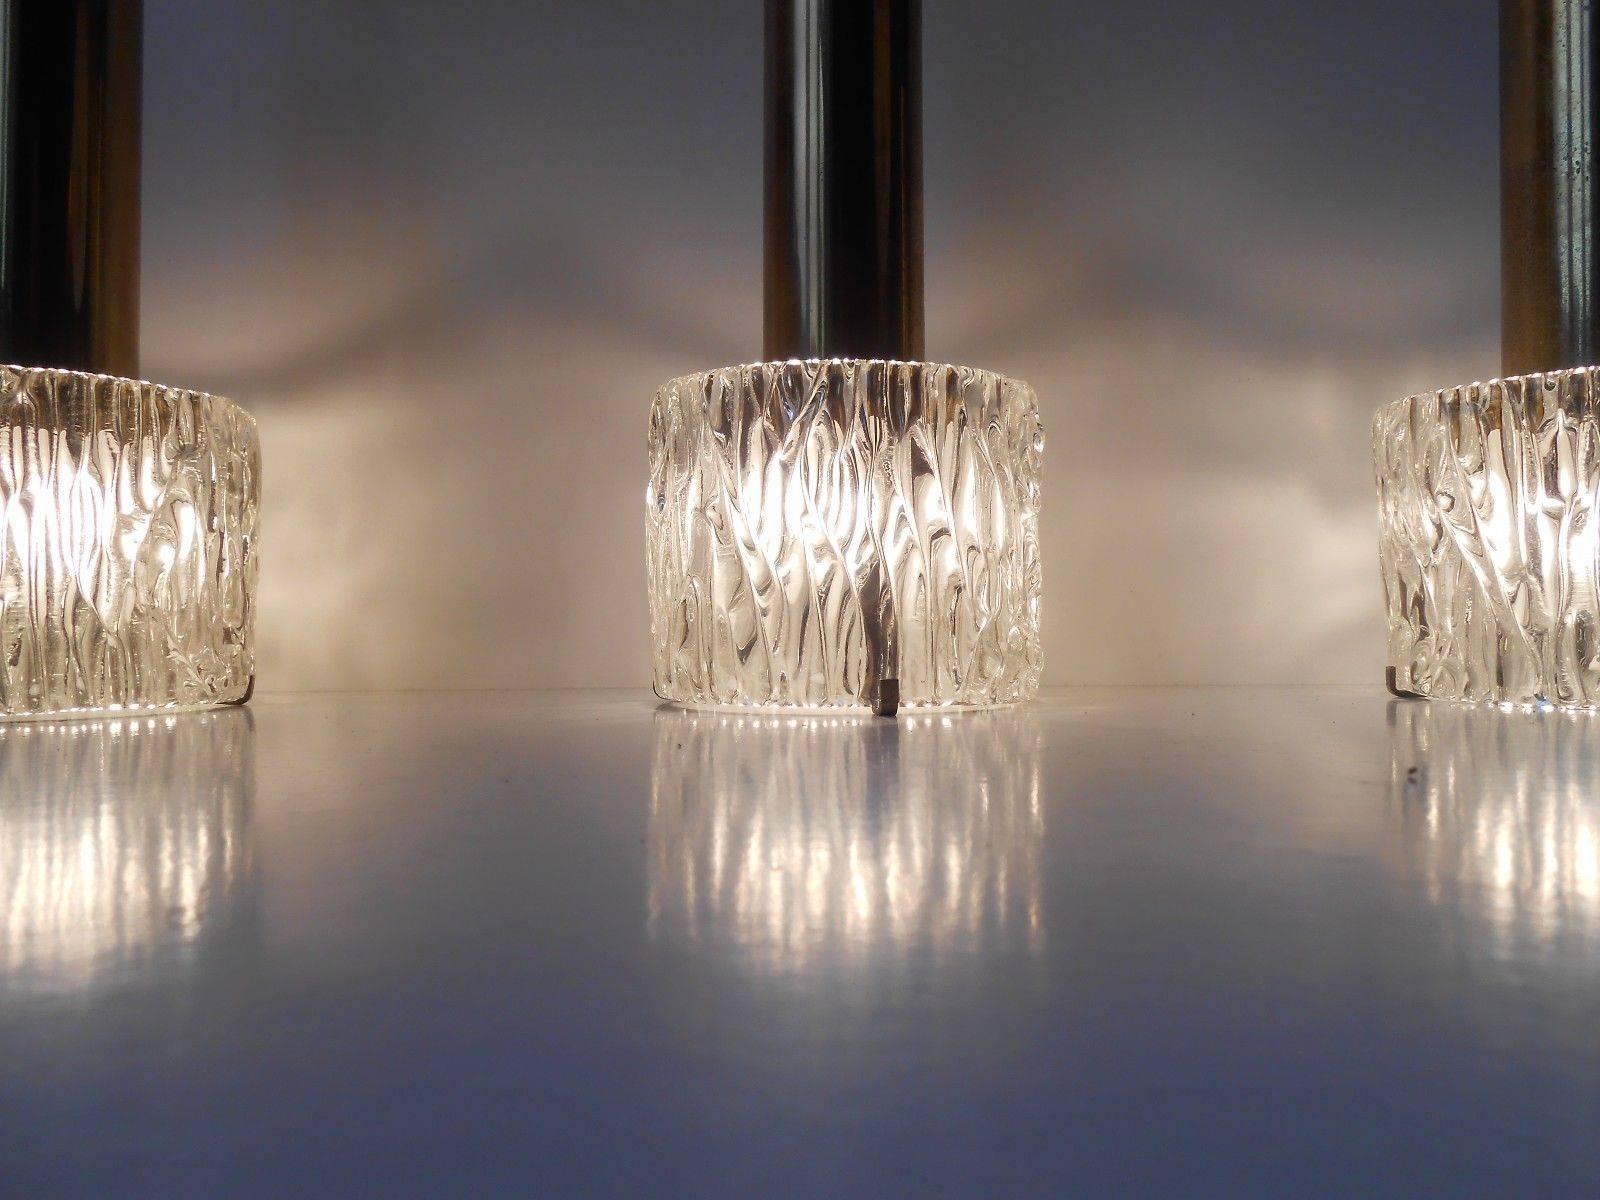 Molded Carl Fagerlund Brass & Crystal Triple Pendant Lamp, Orrefors, 1950s For Sale